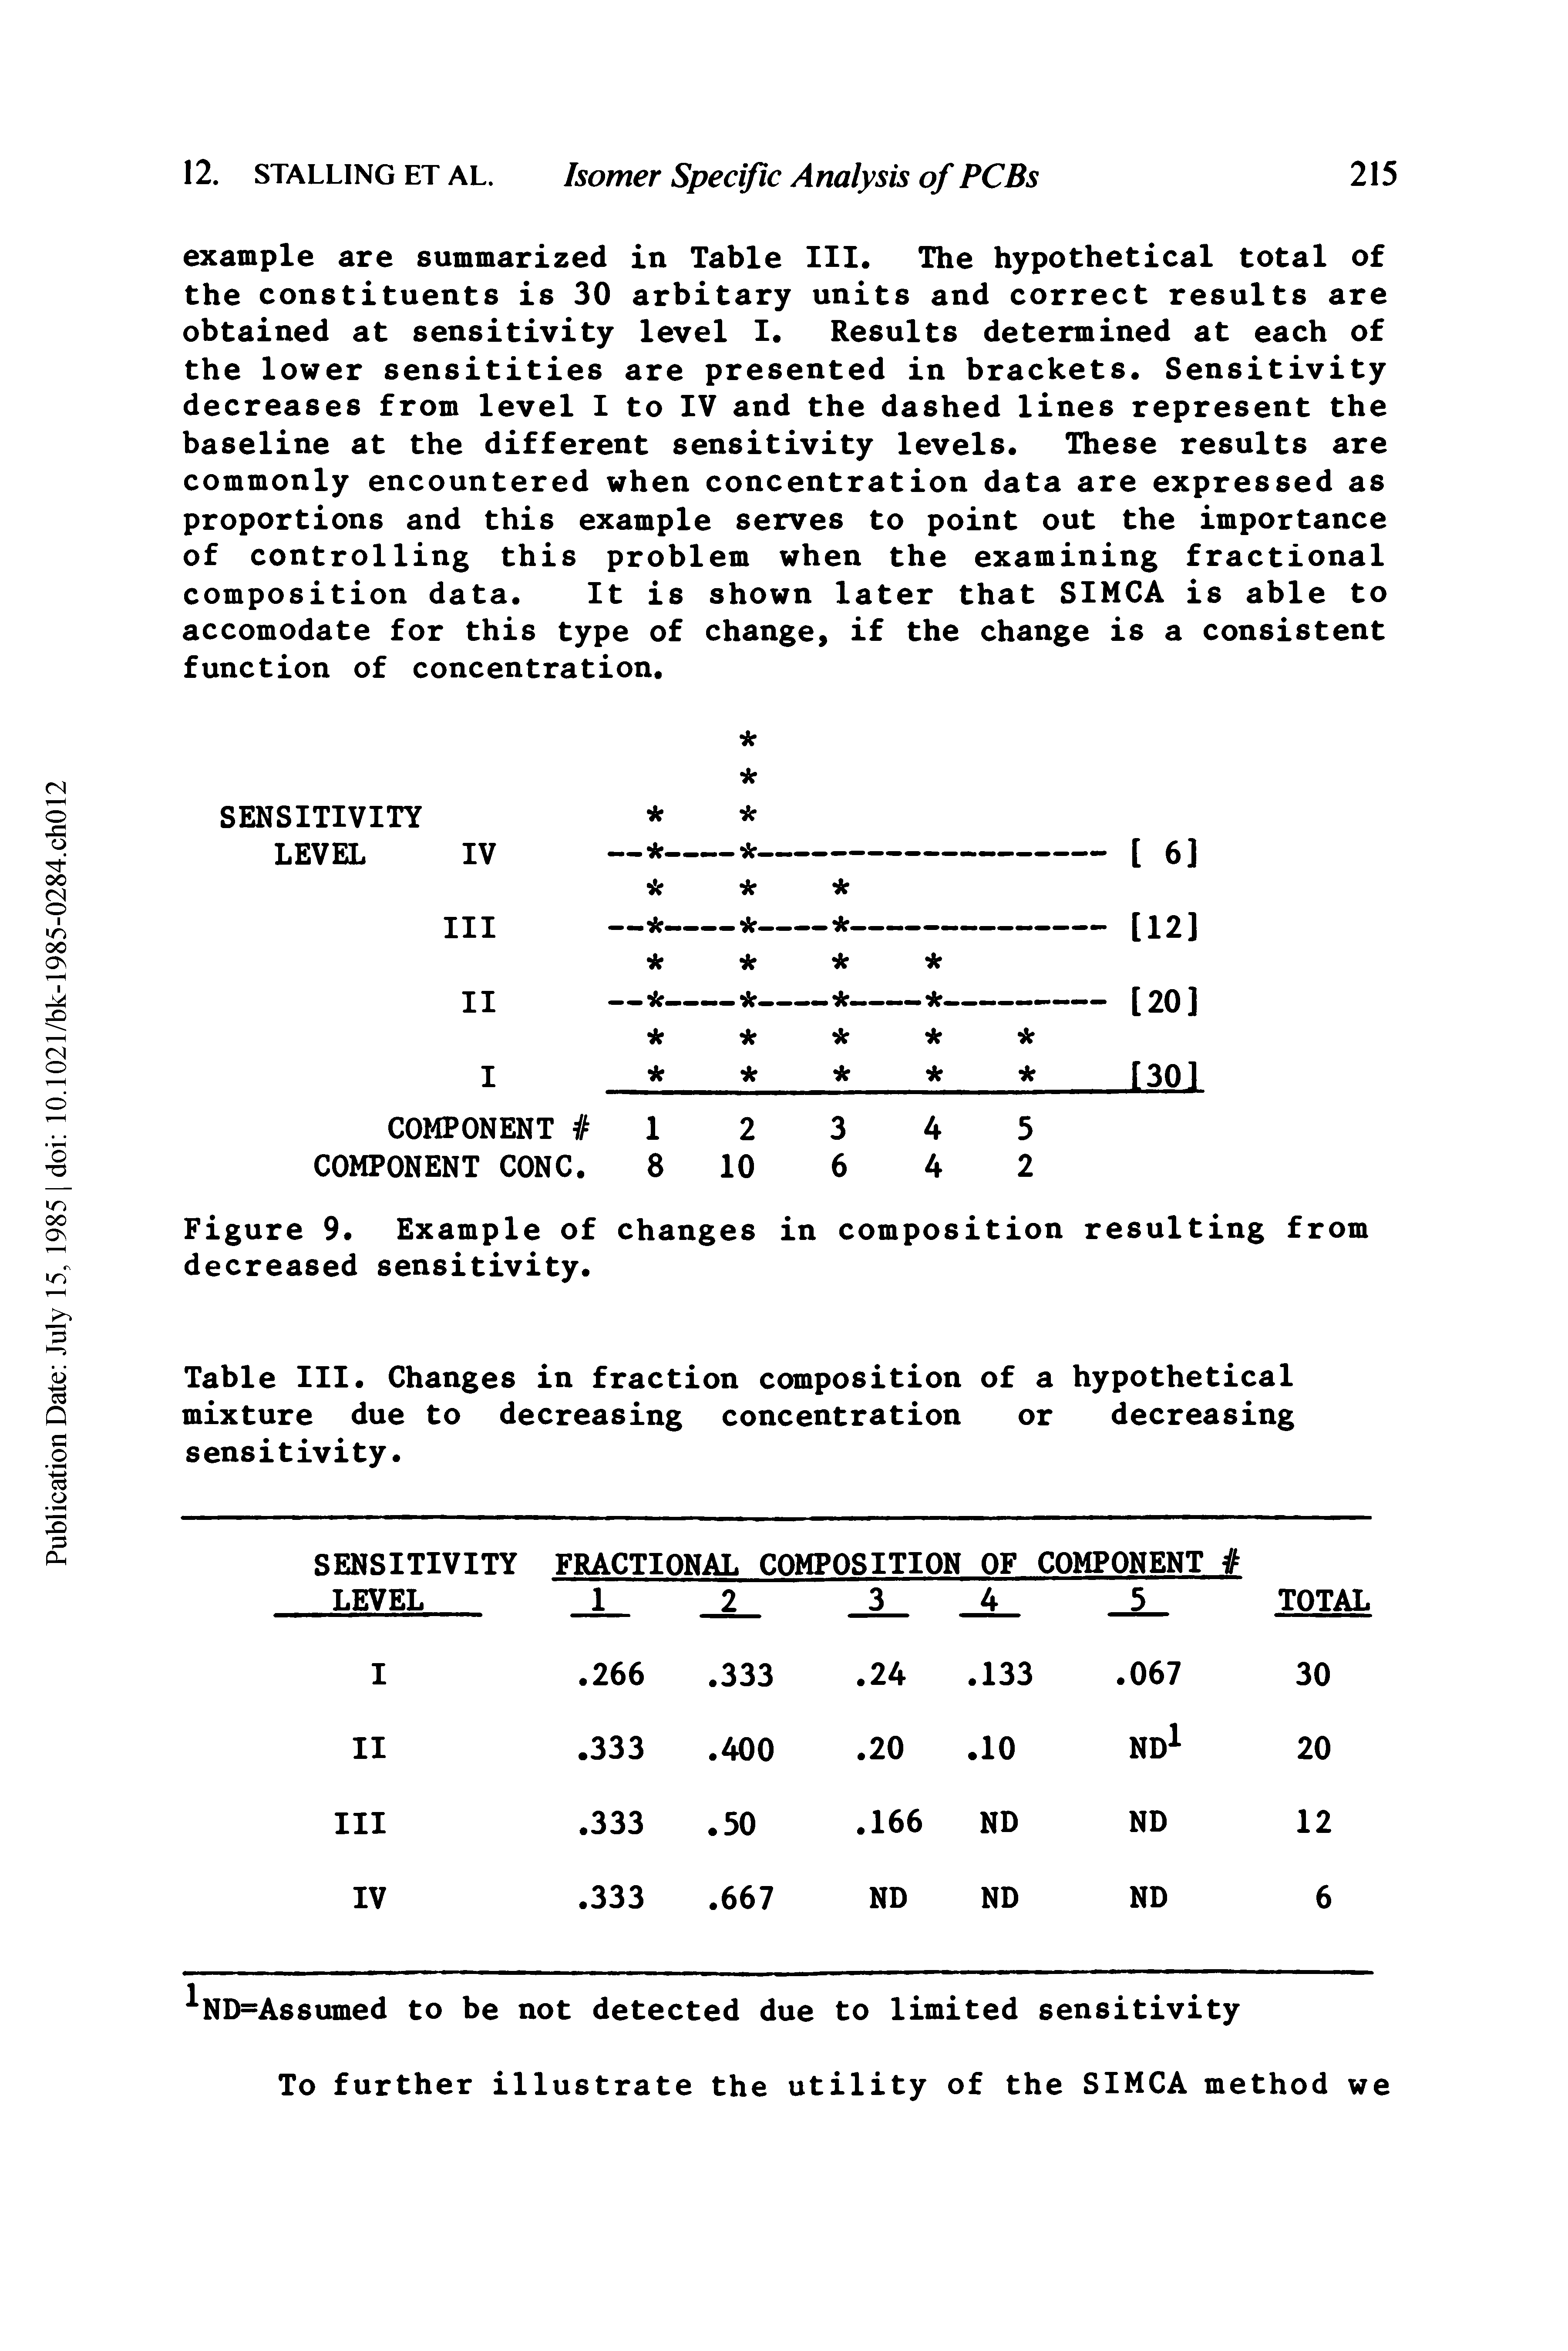 Table III. Changes in fraction composition of a hypothetical mixture due to decreasing concentration or decreasing sensitivity.